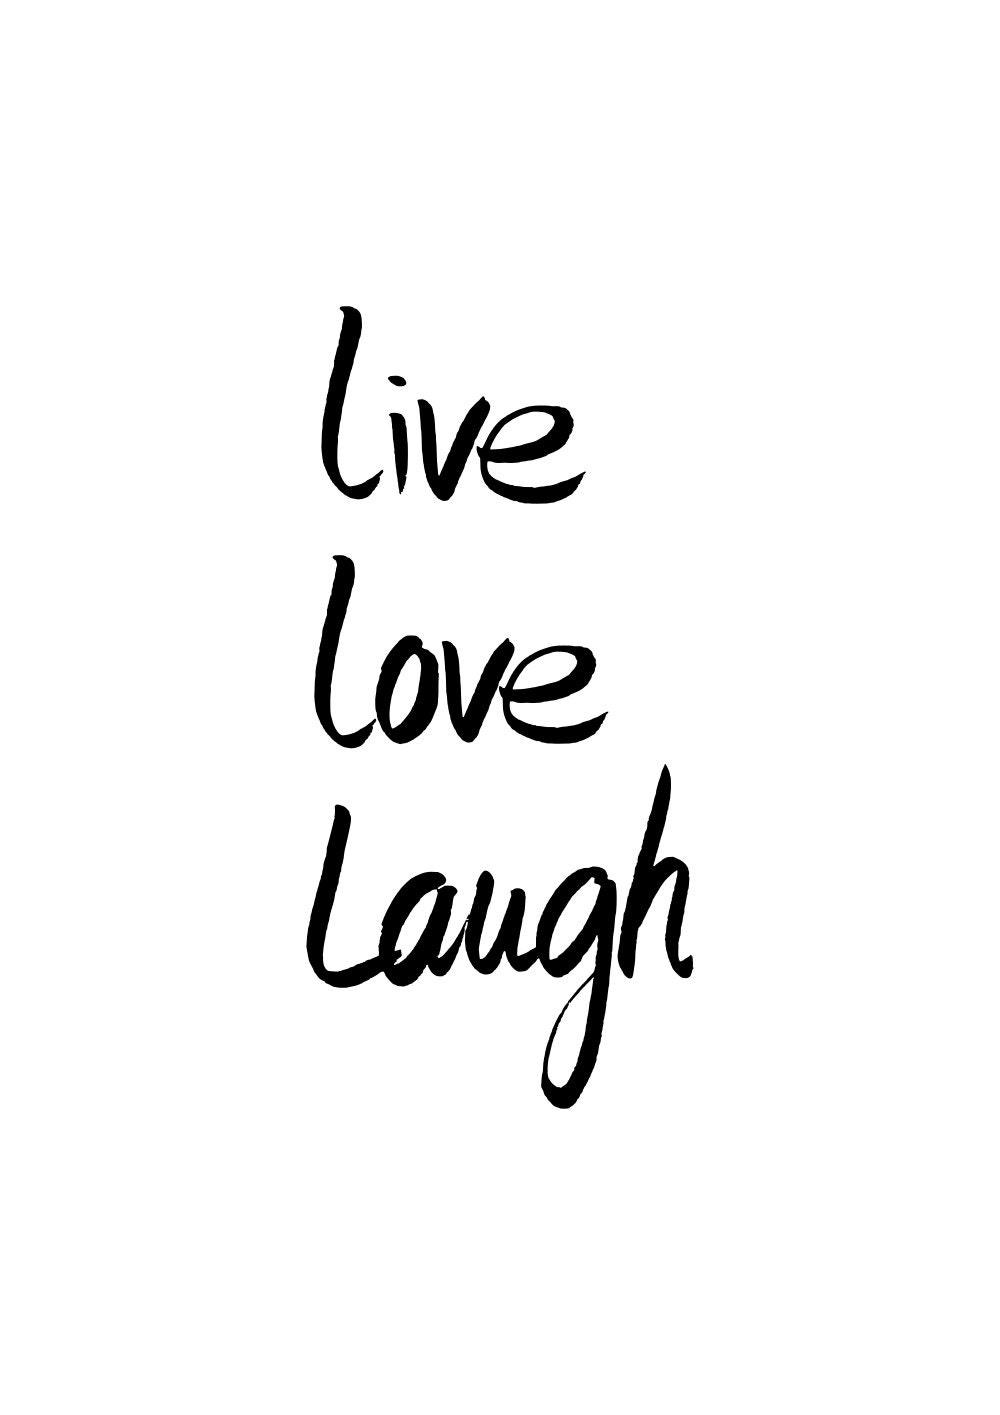 Live Love Laugh Printable quote Instant download